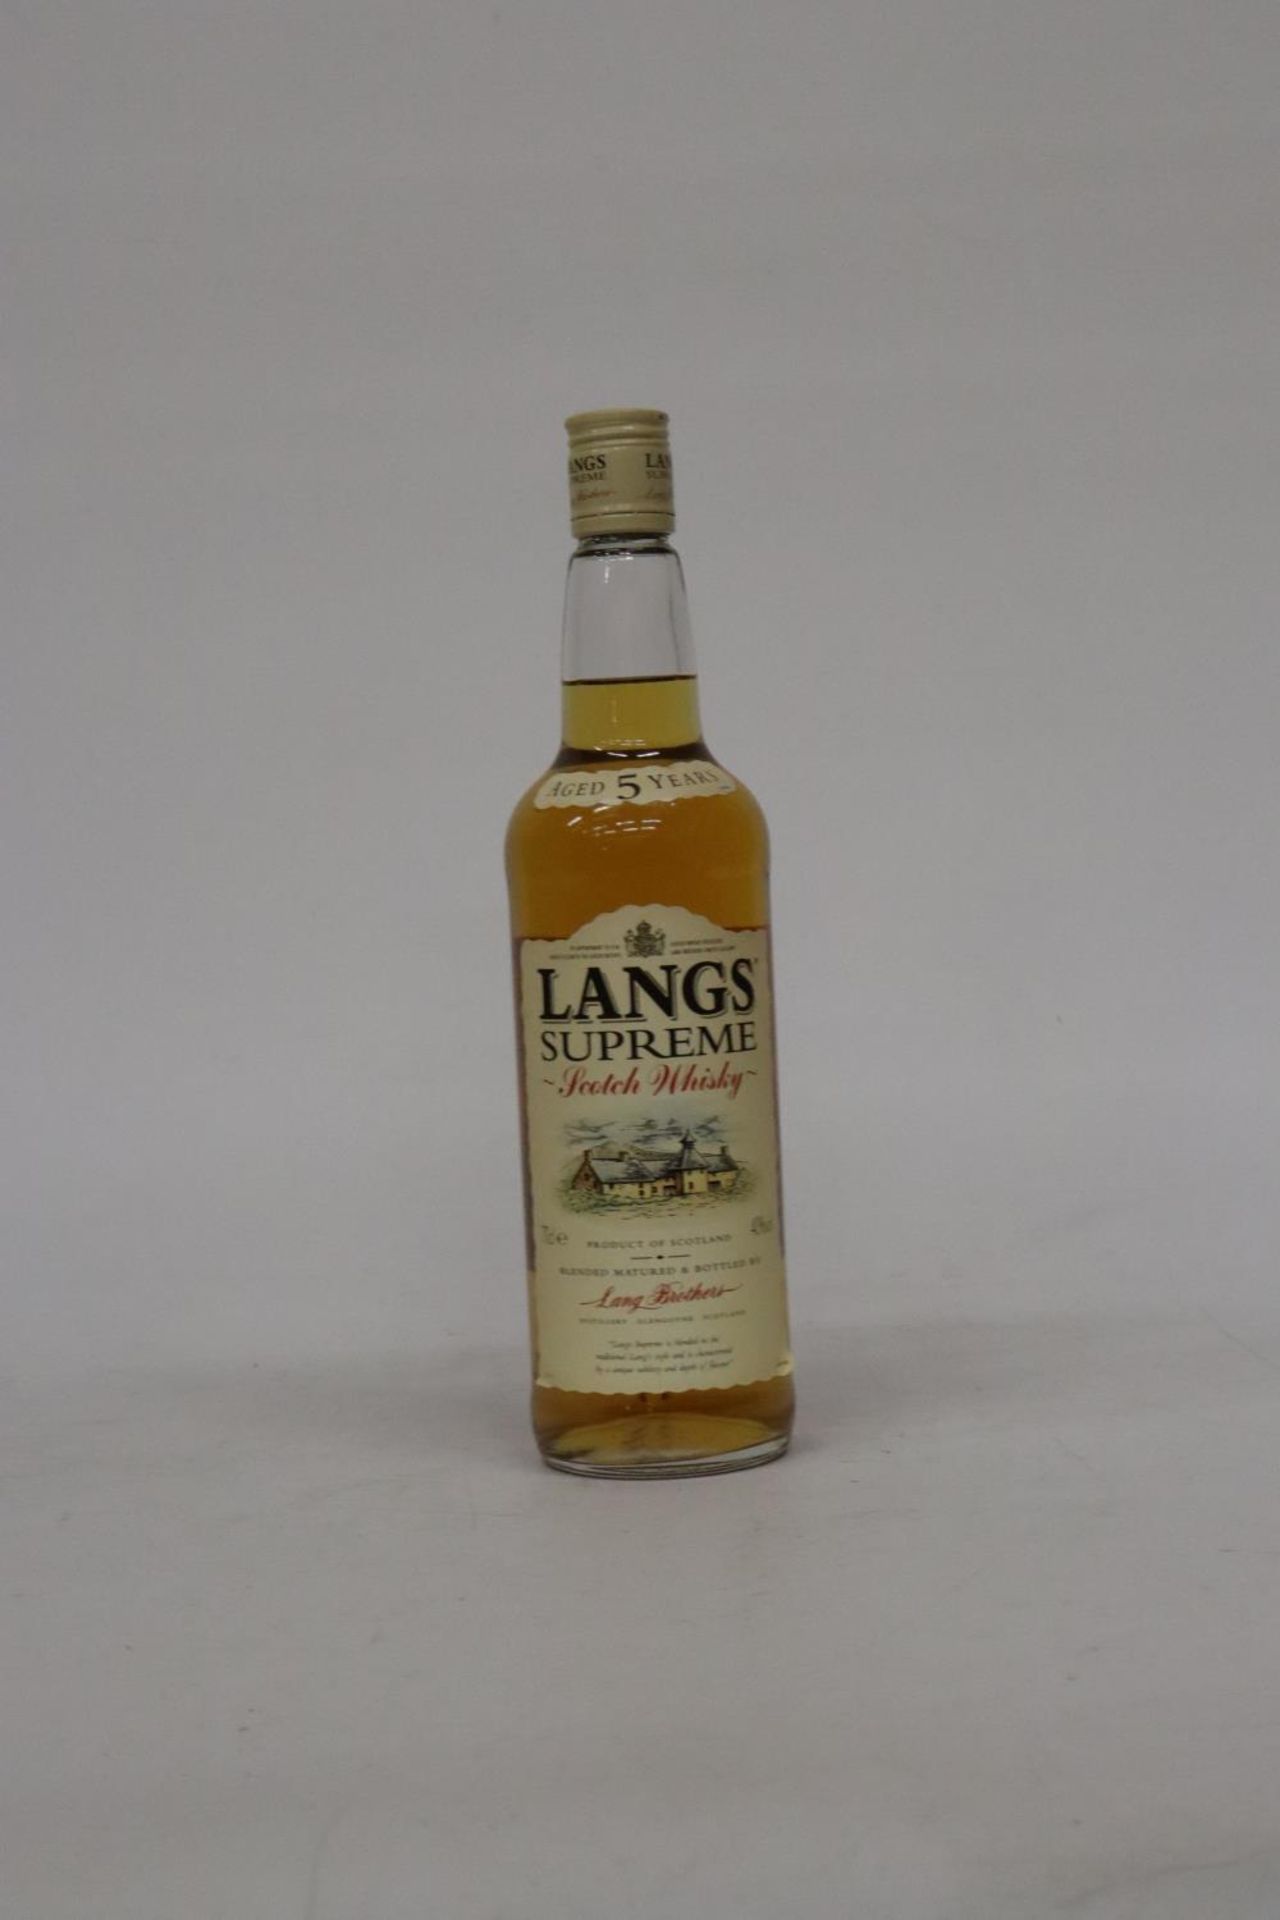 A 70CL BOTTLE OF LANGS SUPREME SCOTCH WHISKY